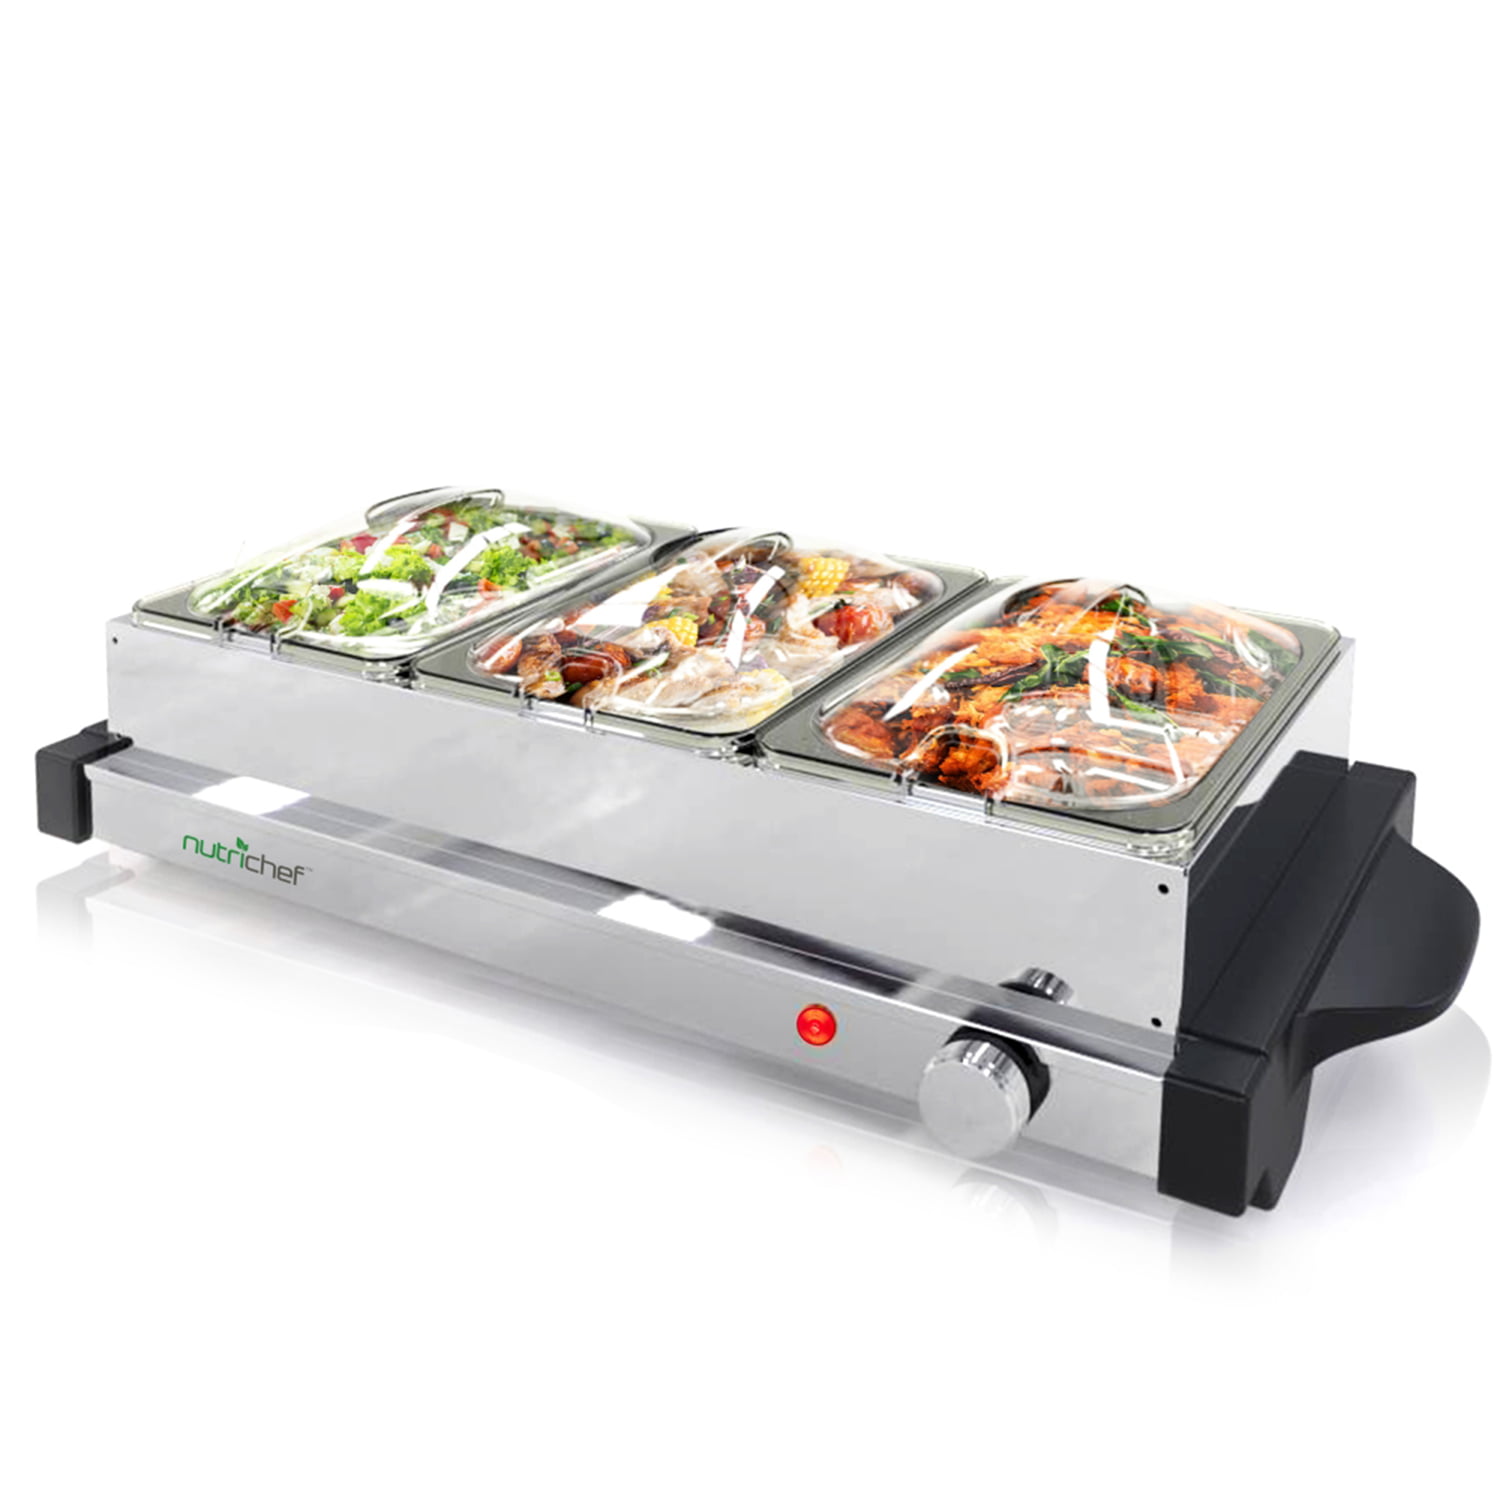 Nutrichef Professional Stainless Steel Buffet Warmer Server with 3 Trays |  Portable Hot Plate Food Warmer Station for Parties & Events | Easy to Clean